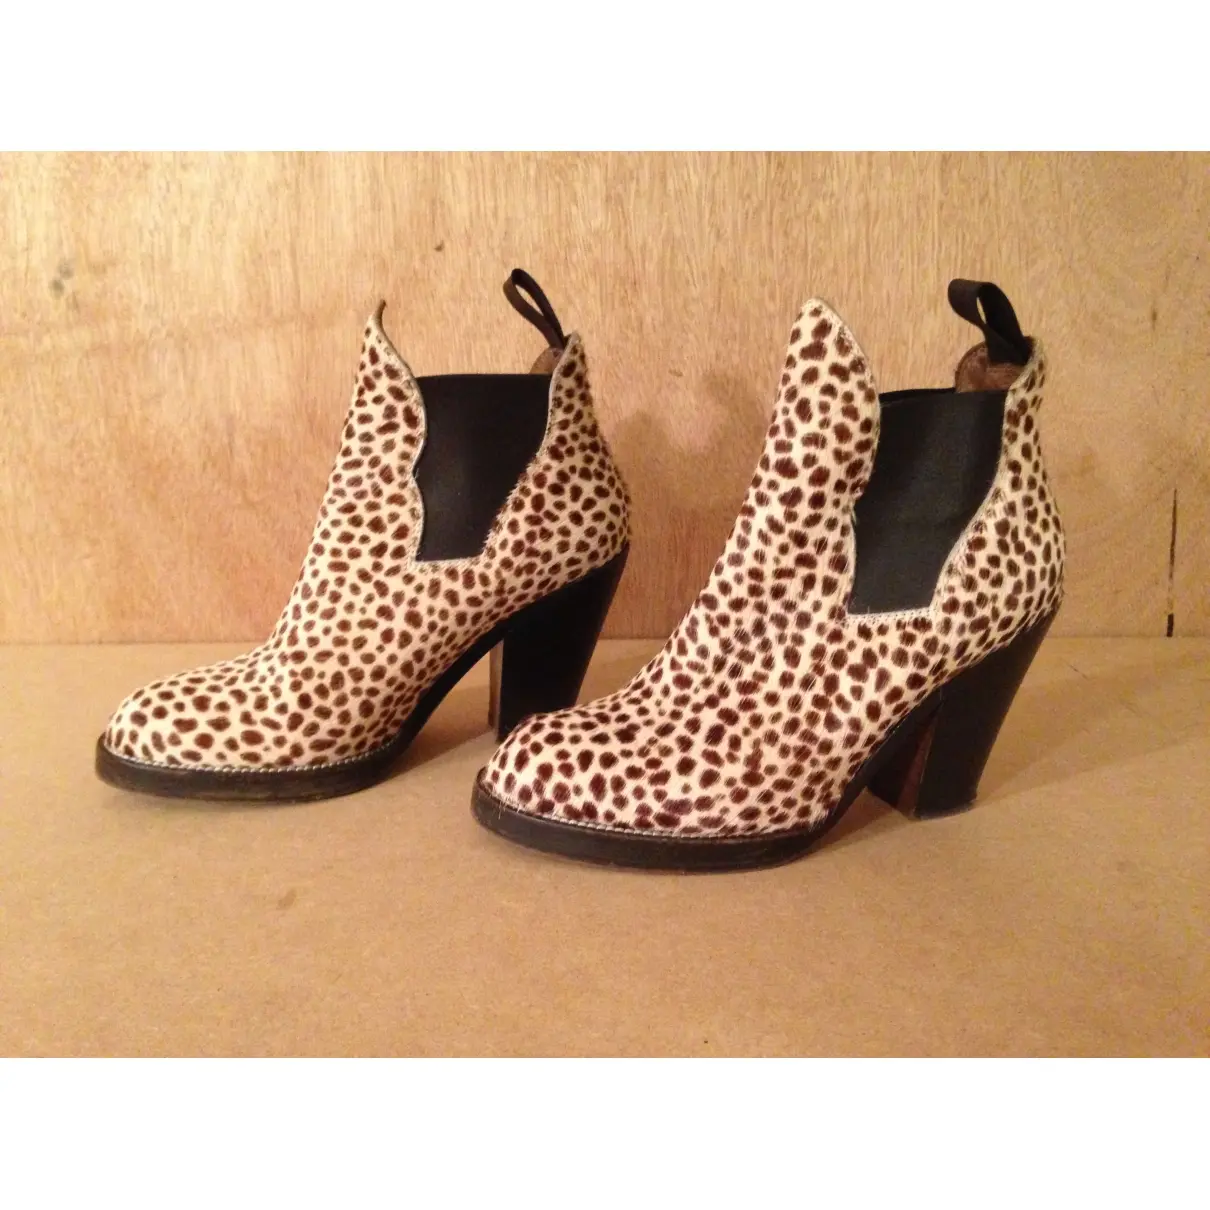 Acne Studios Star pony-style calfskin ankle boots for sale